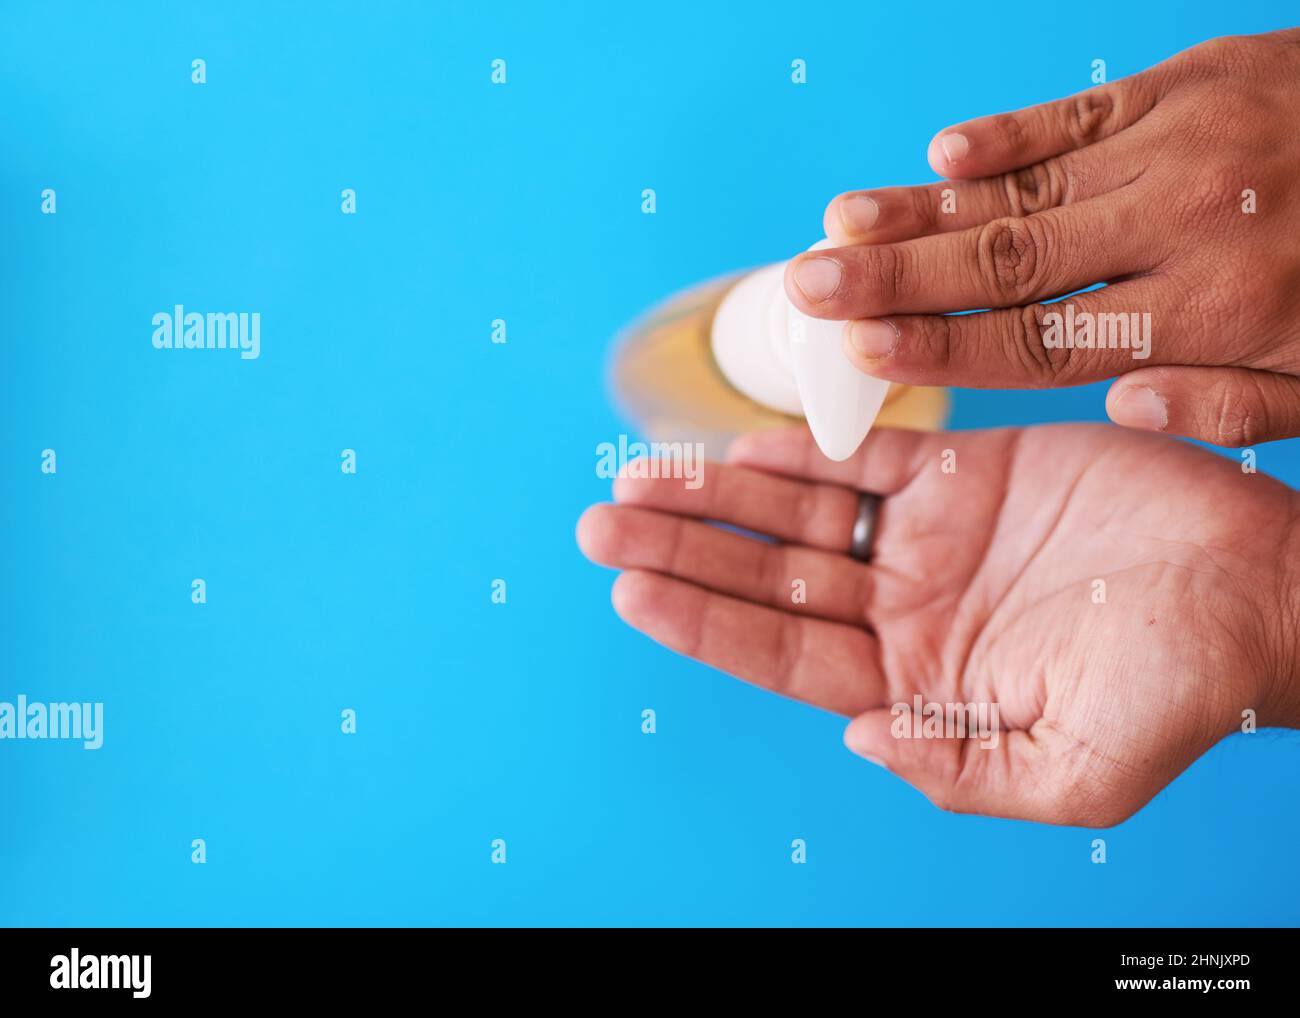 An overhead shot of a man dispensing soap against a blue background Stock Photo